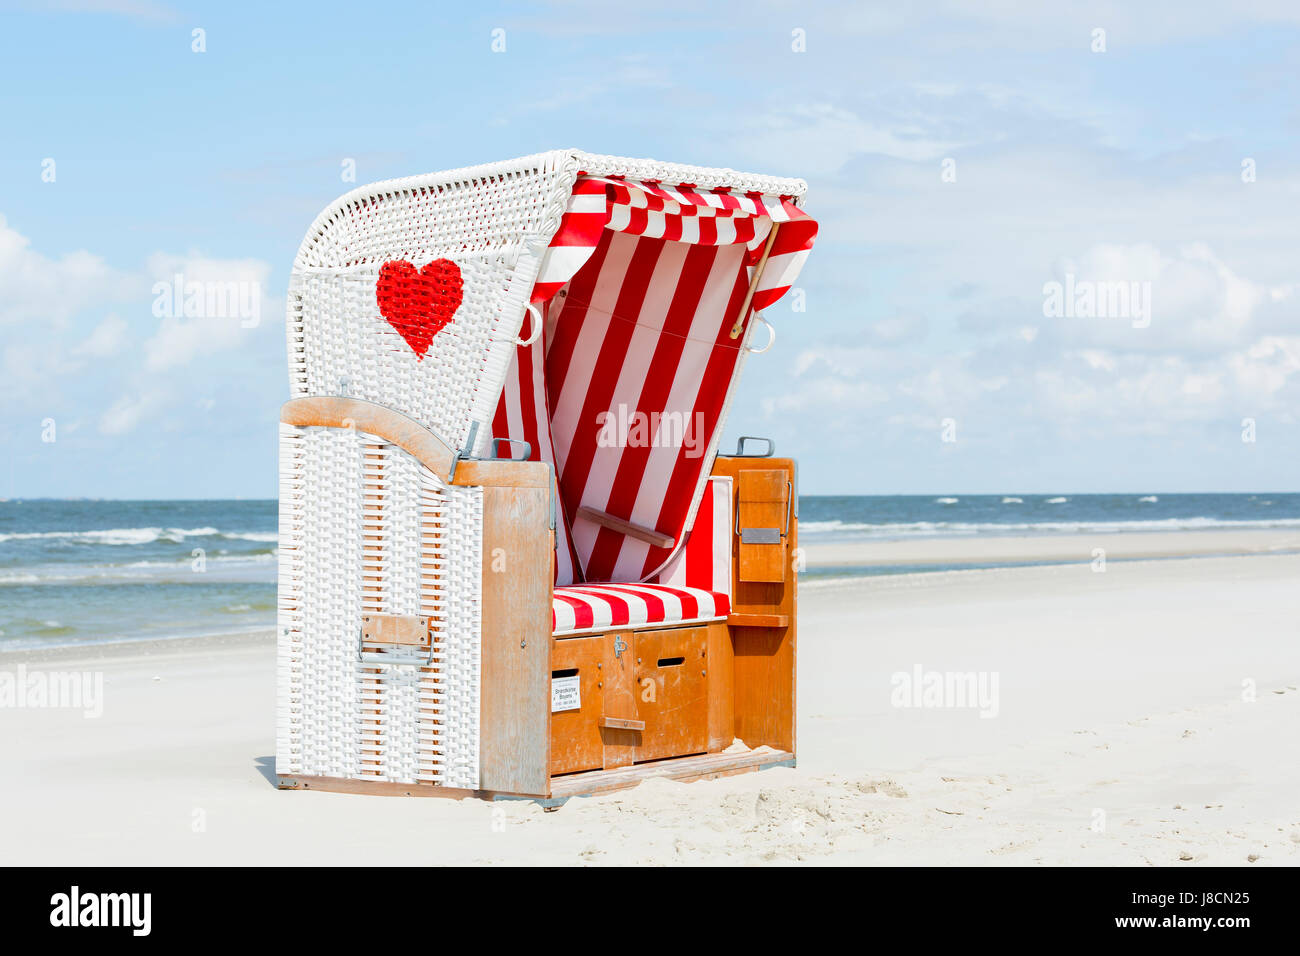 Beach chair with red heart on the beach, Amrum, North Frisian Islands, Schleswig-Holstein, Germany Stock Photo